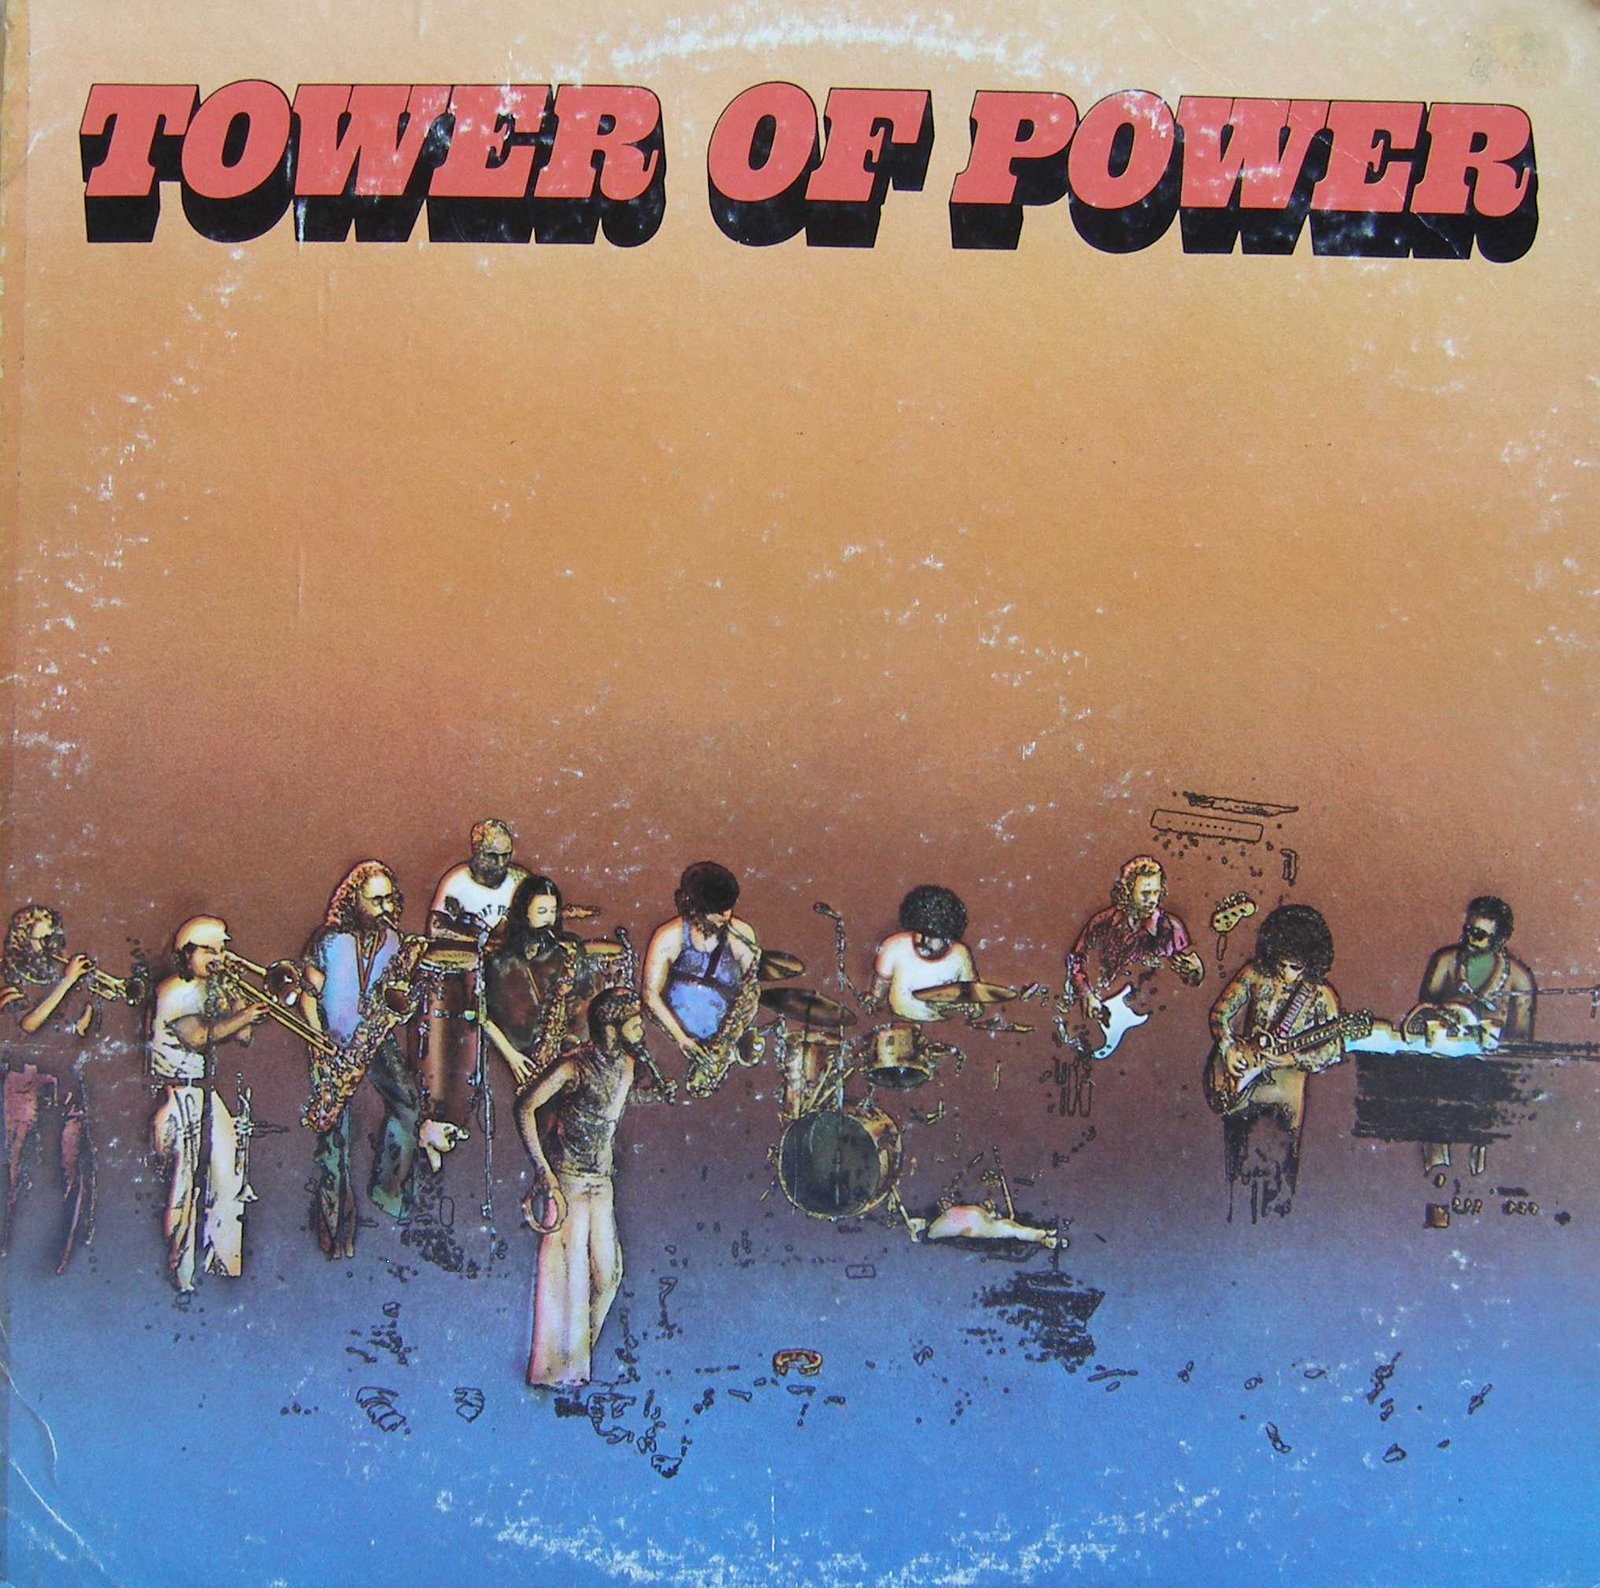 [tower+of+power+-+1973+-+front+lp.JPG]